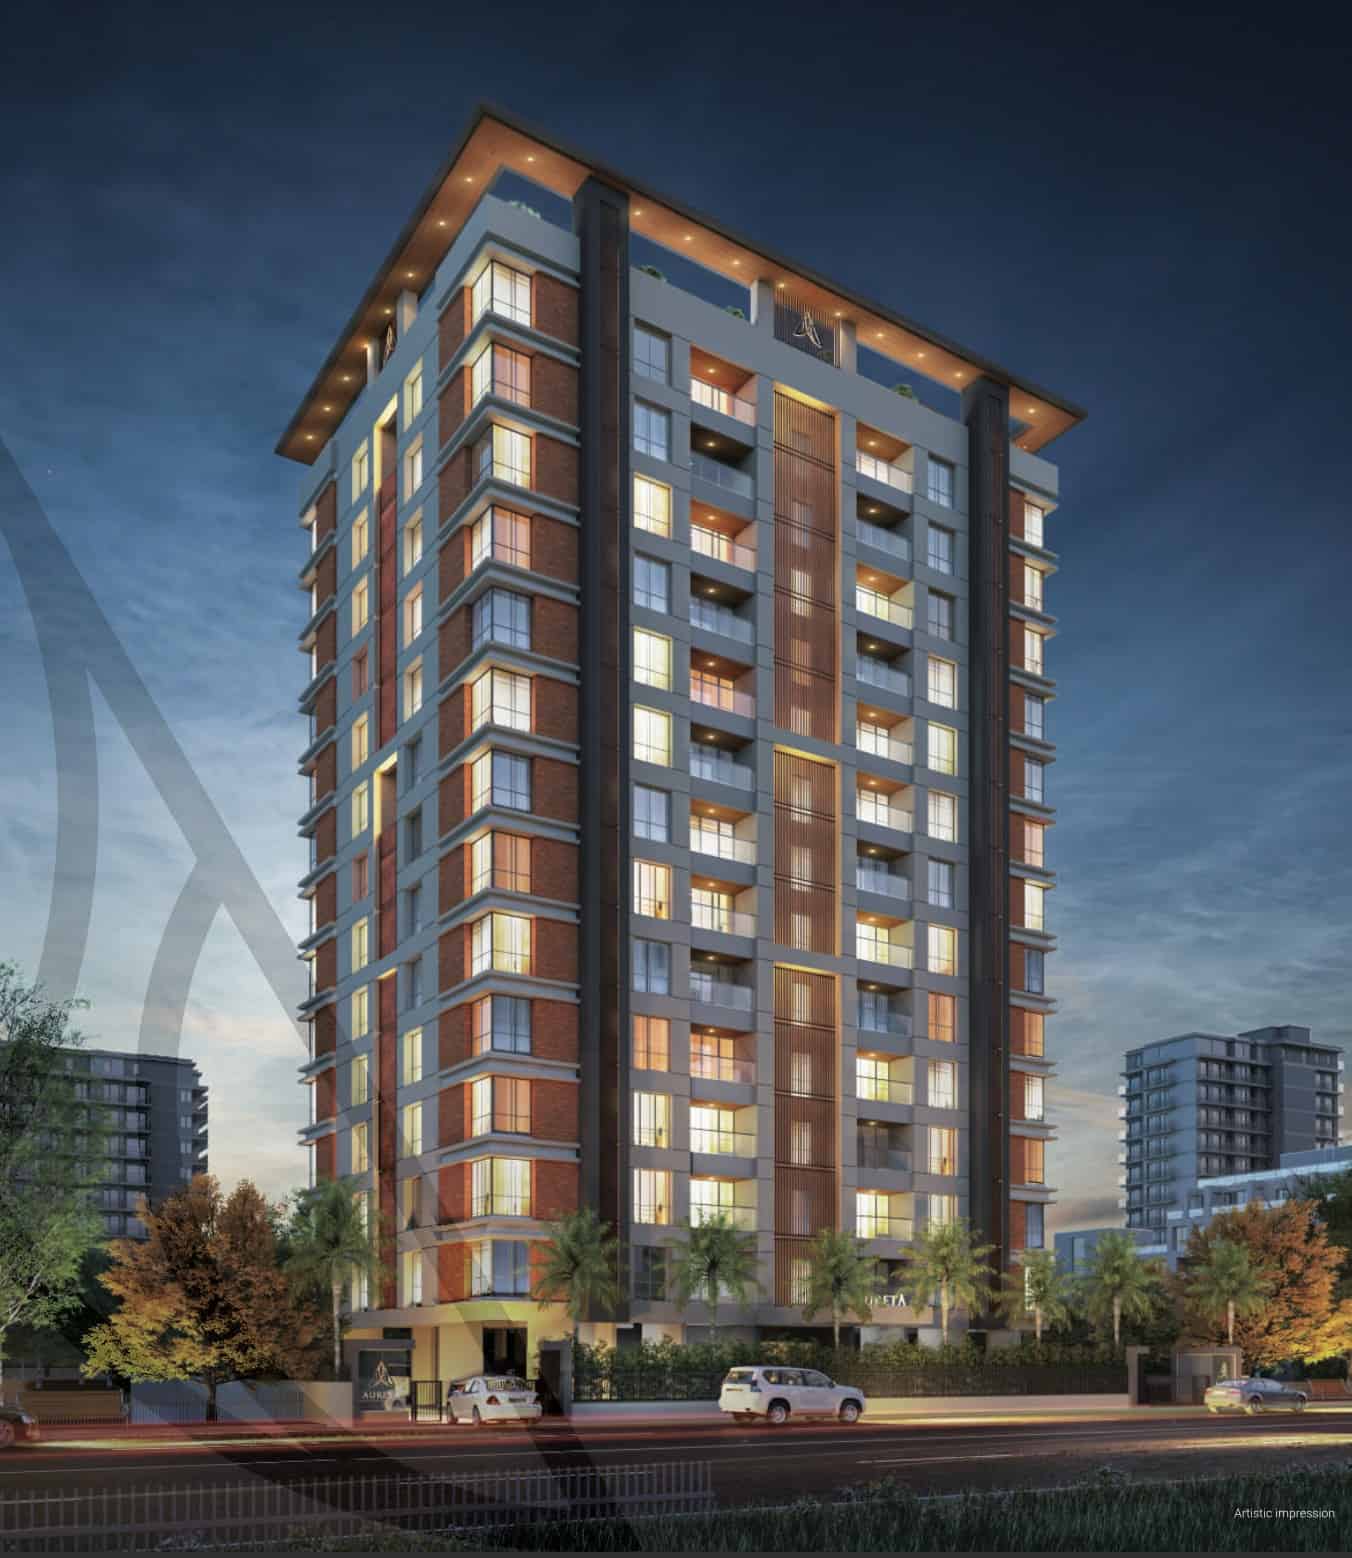 Luxurious 3/3.5 BHK Flats in Koregaon Park Pune for Sale.